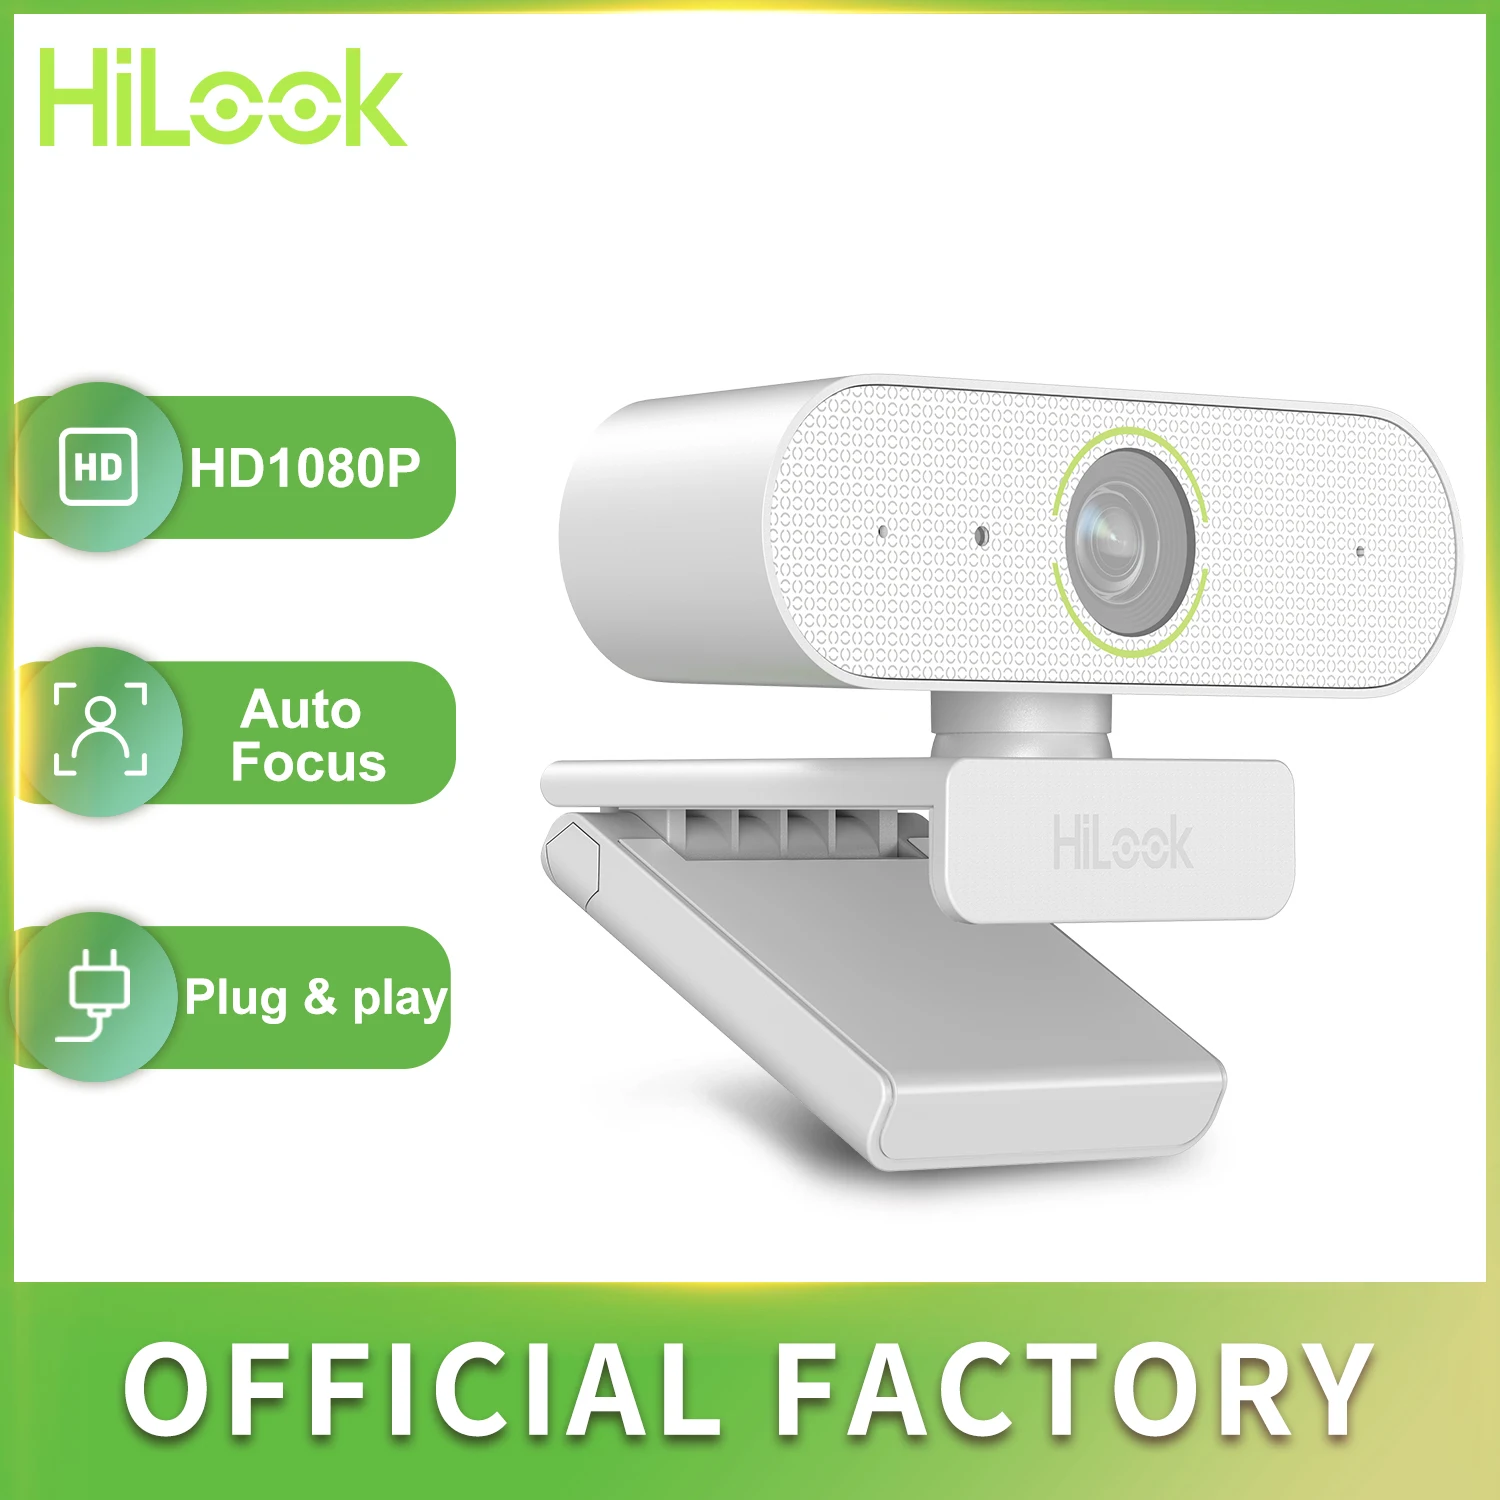 

HiLook 1080p HD 30fps Webcam Distortion-Free Wide Angle Noise-suppressing Built-in Mic Streaming Camera for PC MAC Laptop